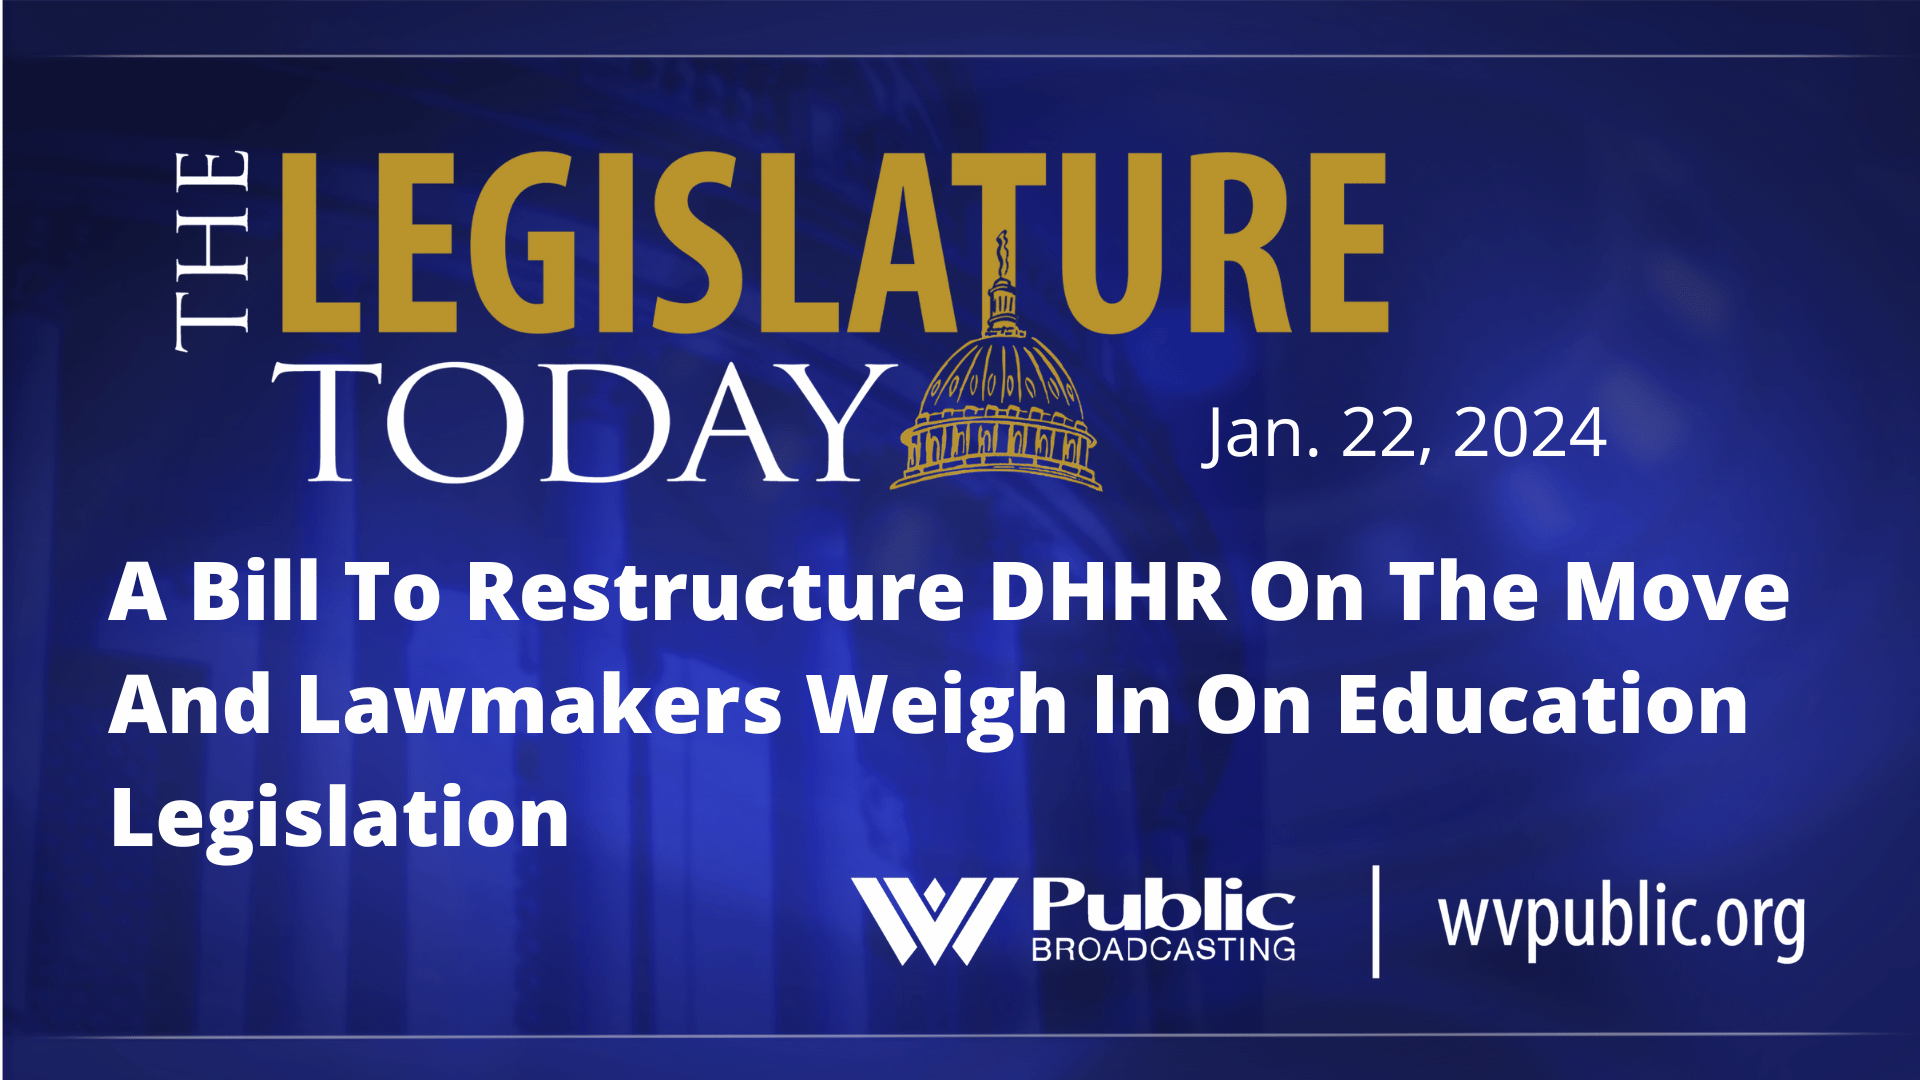 A Bill To Restructure DHHR On The Move And Lawmakers Weigh In On Education Legislation